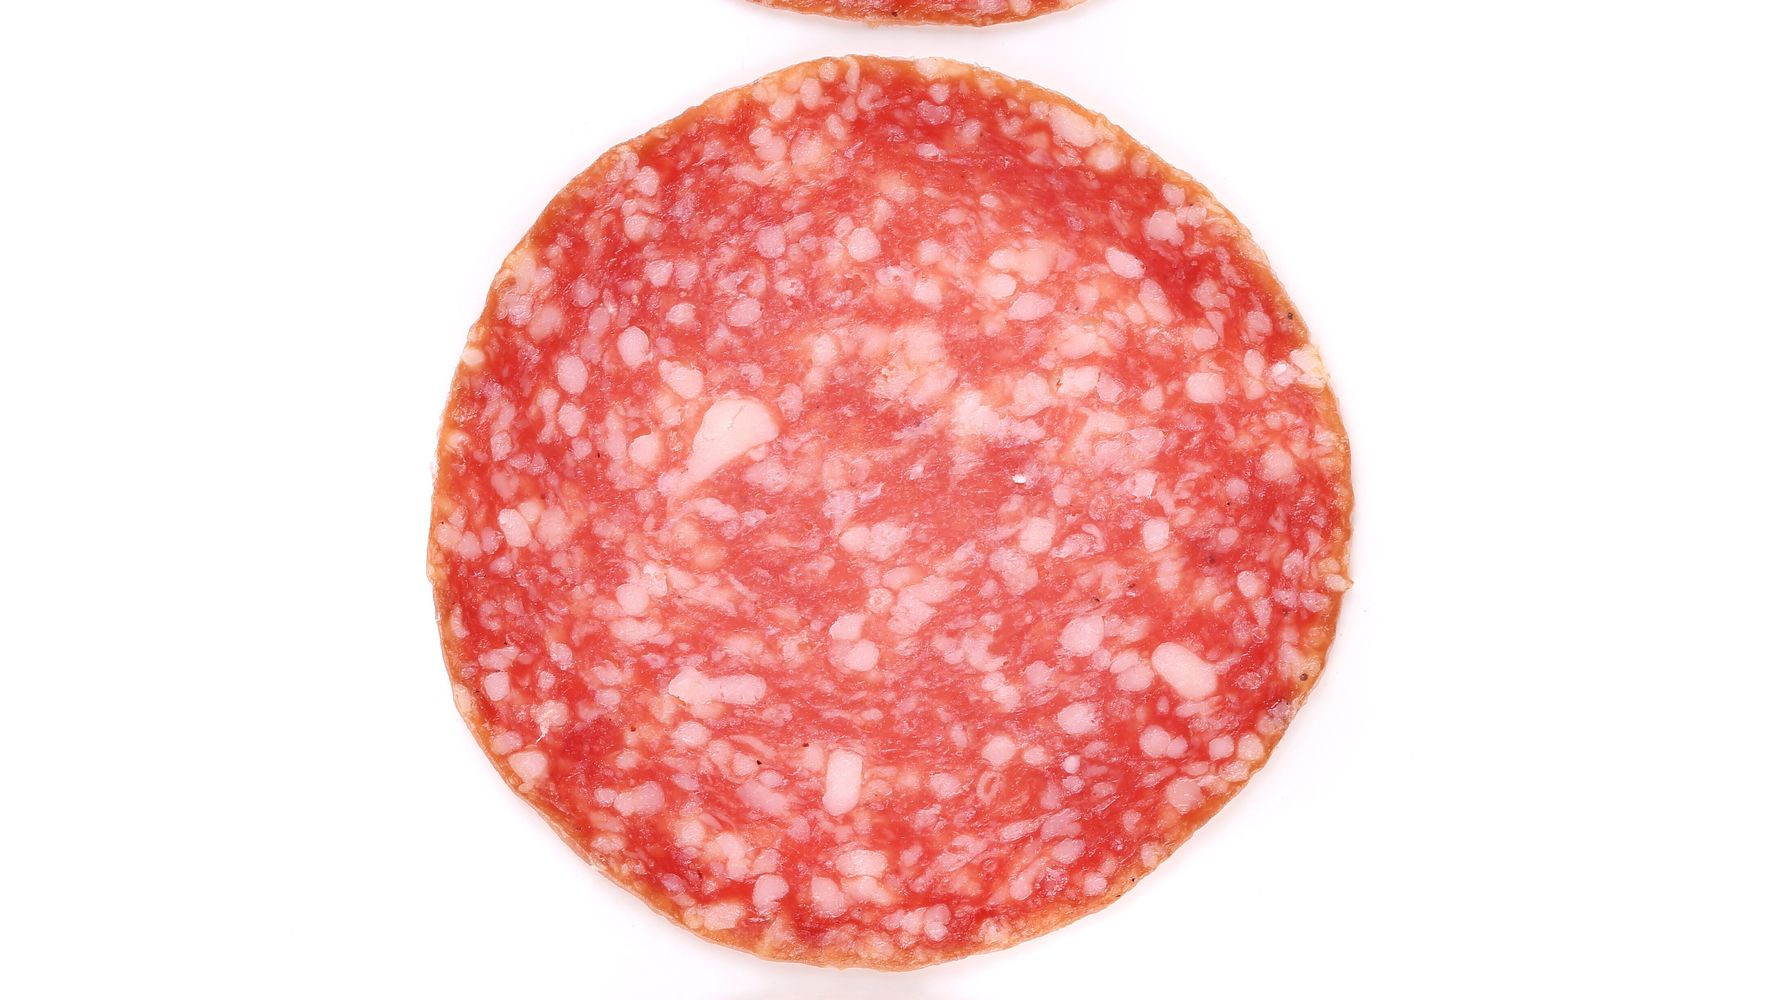 French Scientist Trolls Twitter By Claiming Chorizo Slice Is Actually A Distant Star